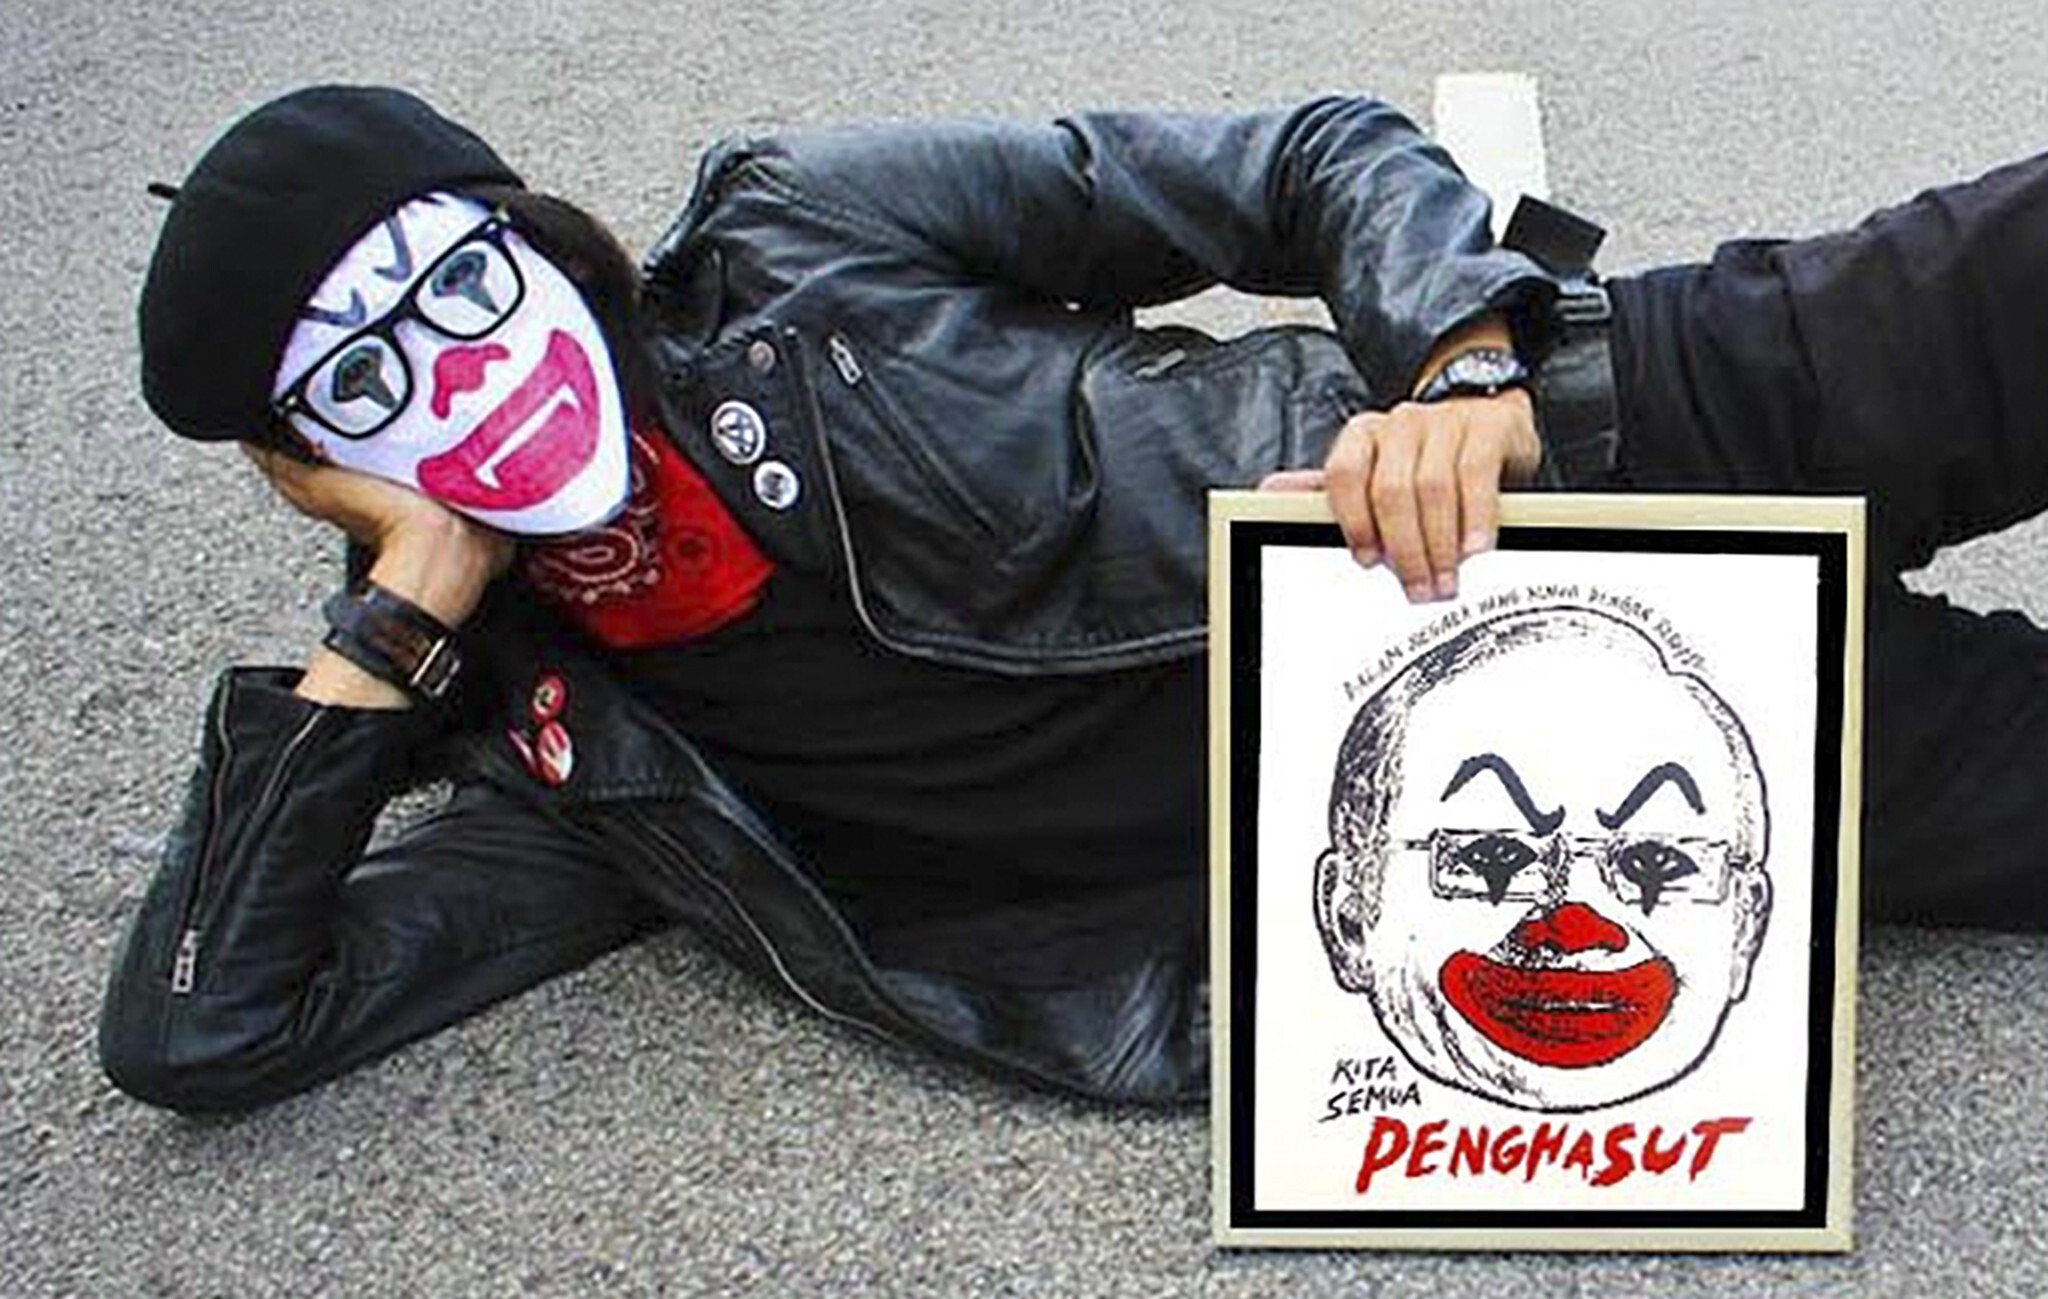 Malaysian artist Fahmi Reza posing with his work depicting former prime minister Najib Razak as a clown. Both Fahmi and Najib are users of Clubhouse. Photo: Facebook